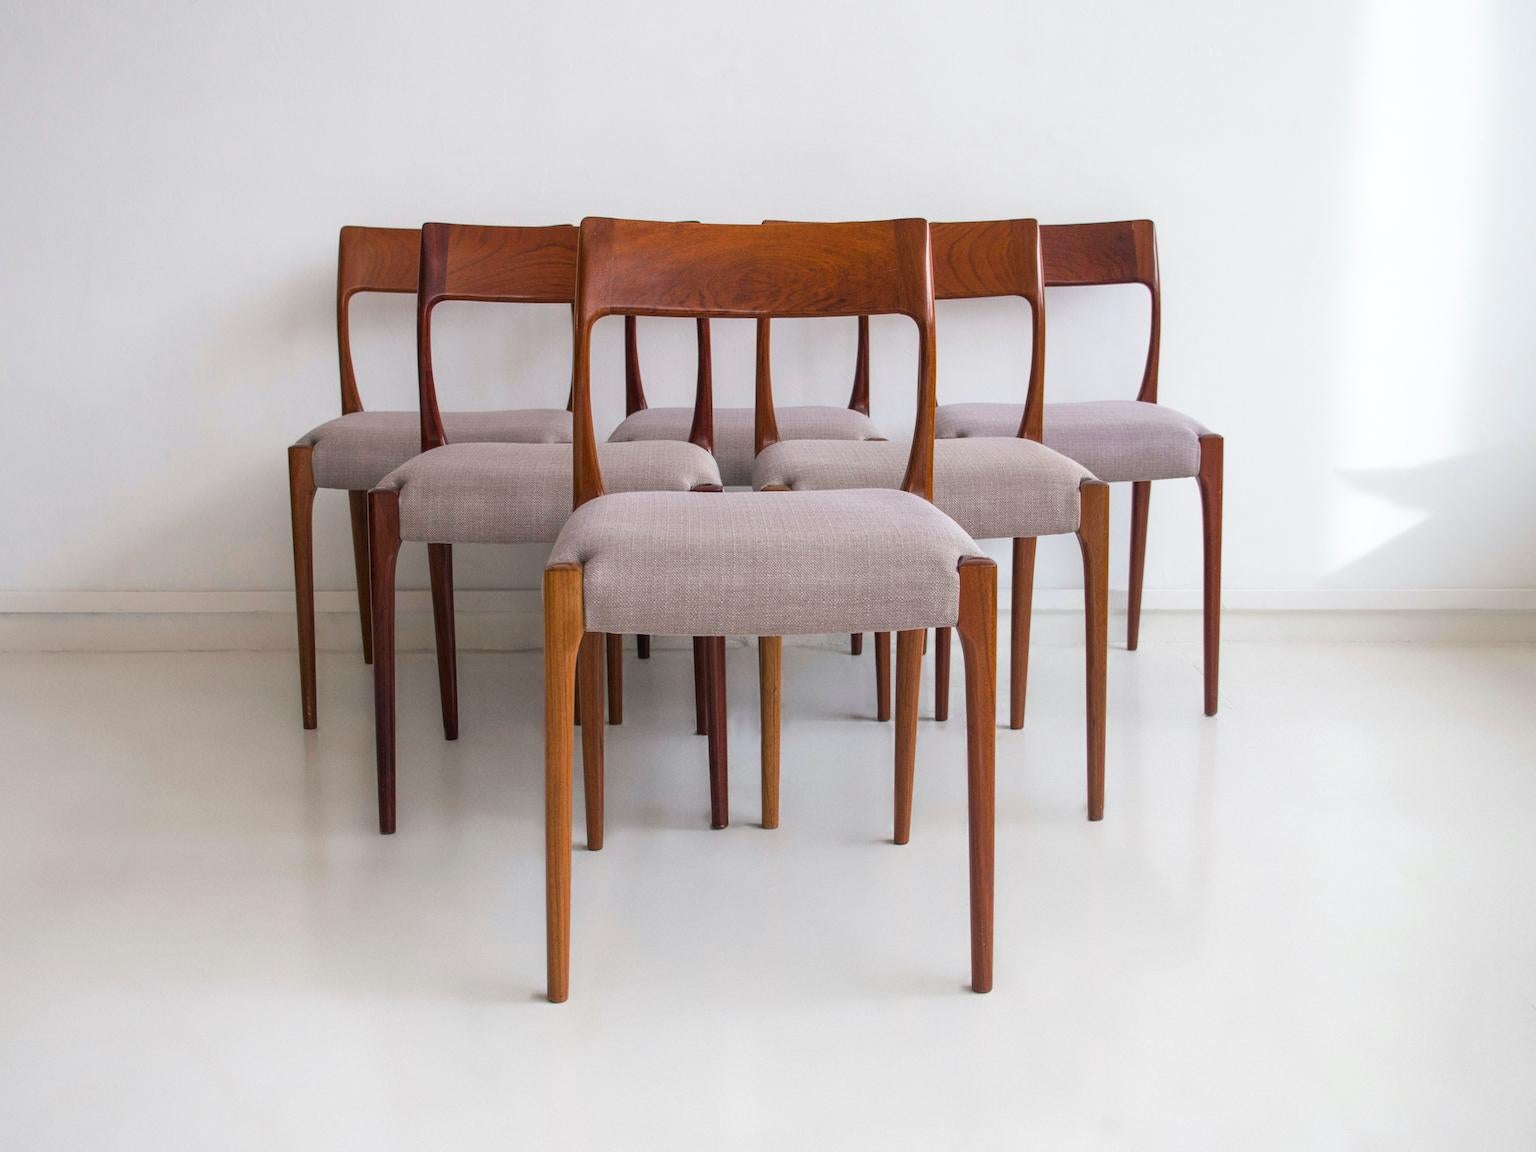 Set of six chairs made in Denmark in the 1960s-1970s. Backrest and feet in teak, seats upholstered in light grey fabric. Reupholstered at a later date.